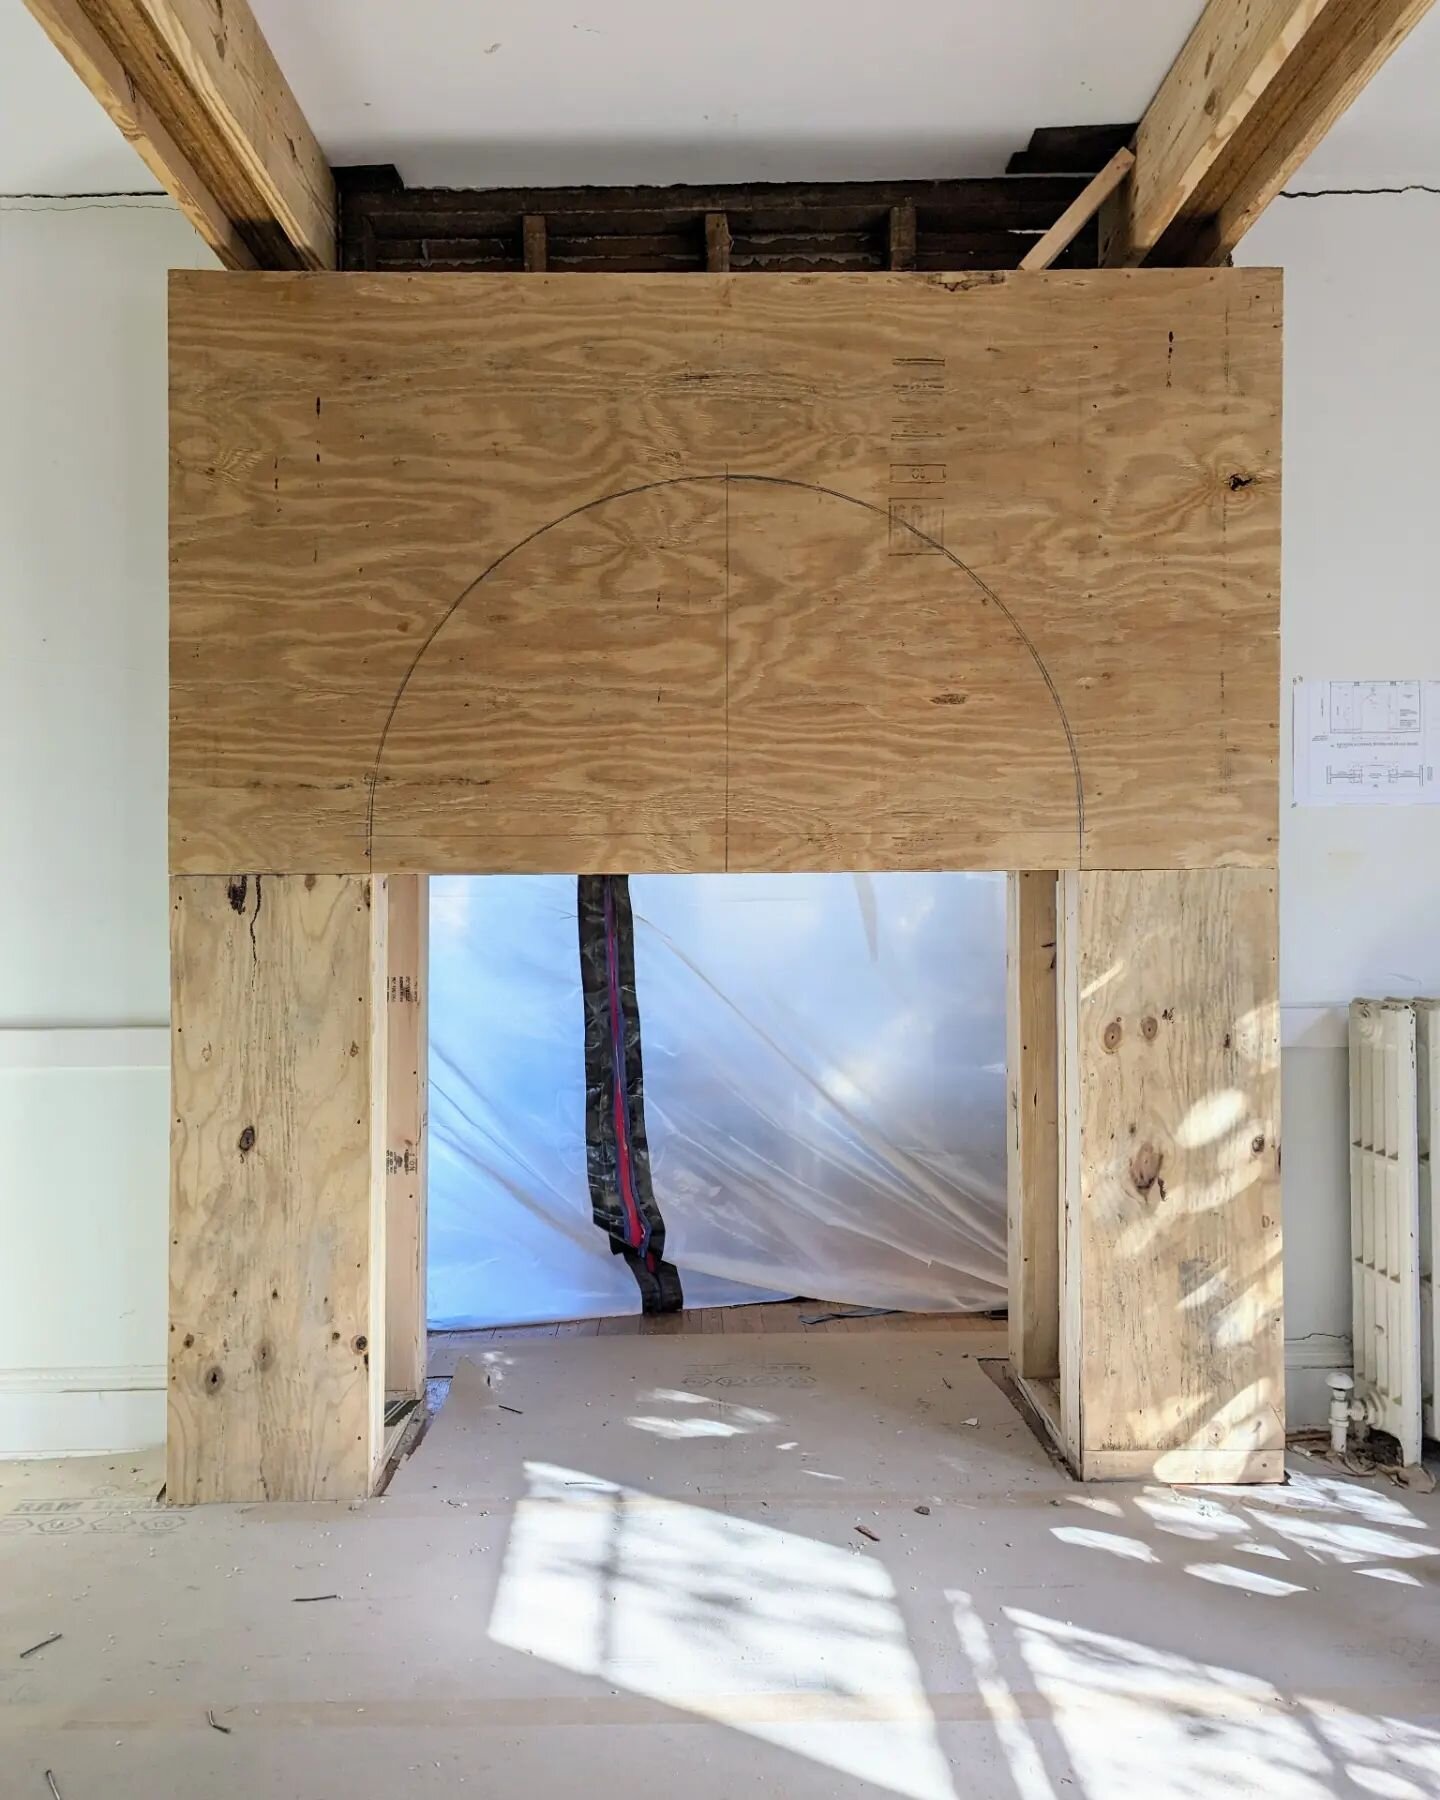 Watching this framer make great use of a nail and a string to transform the space between spaces...

#virginialiving #placemaking #architecture #modern #modernarchitecture #modernoffice #virginia #rva #richmond #virginiamodern #vamodern #classicalmod